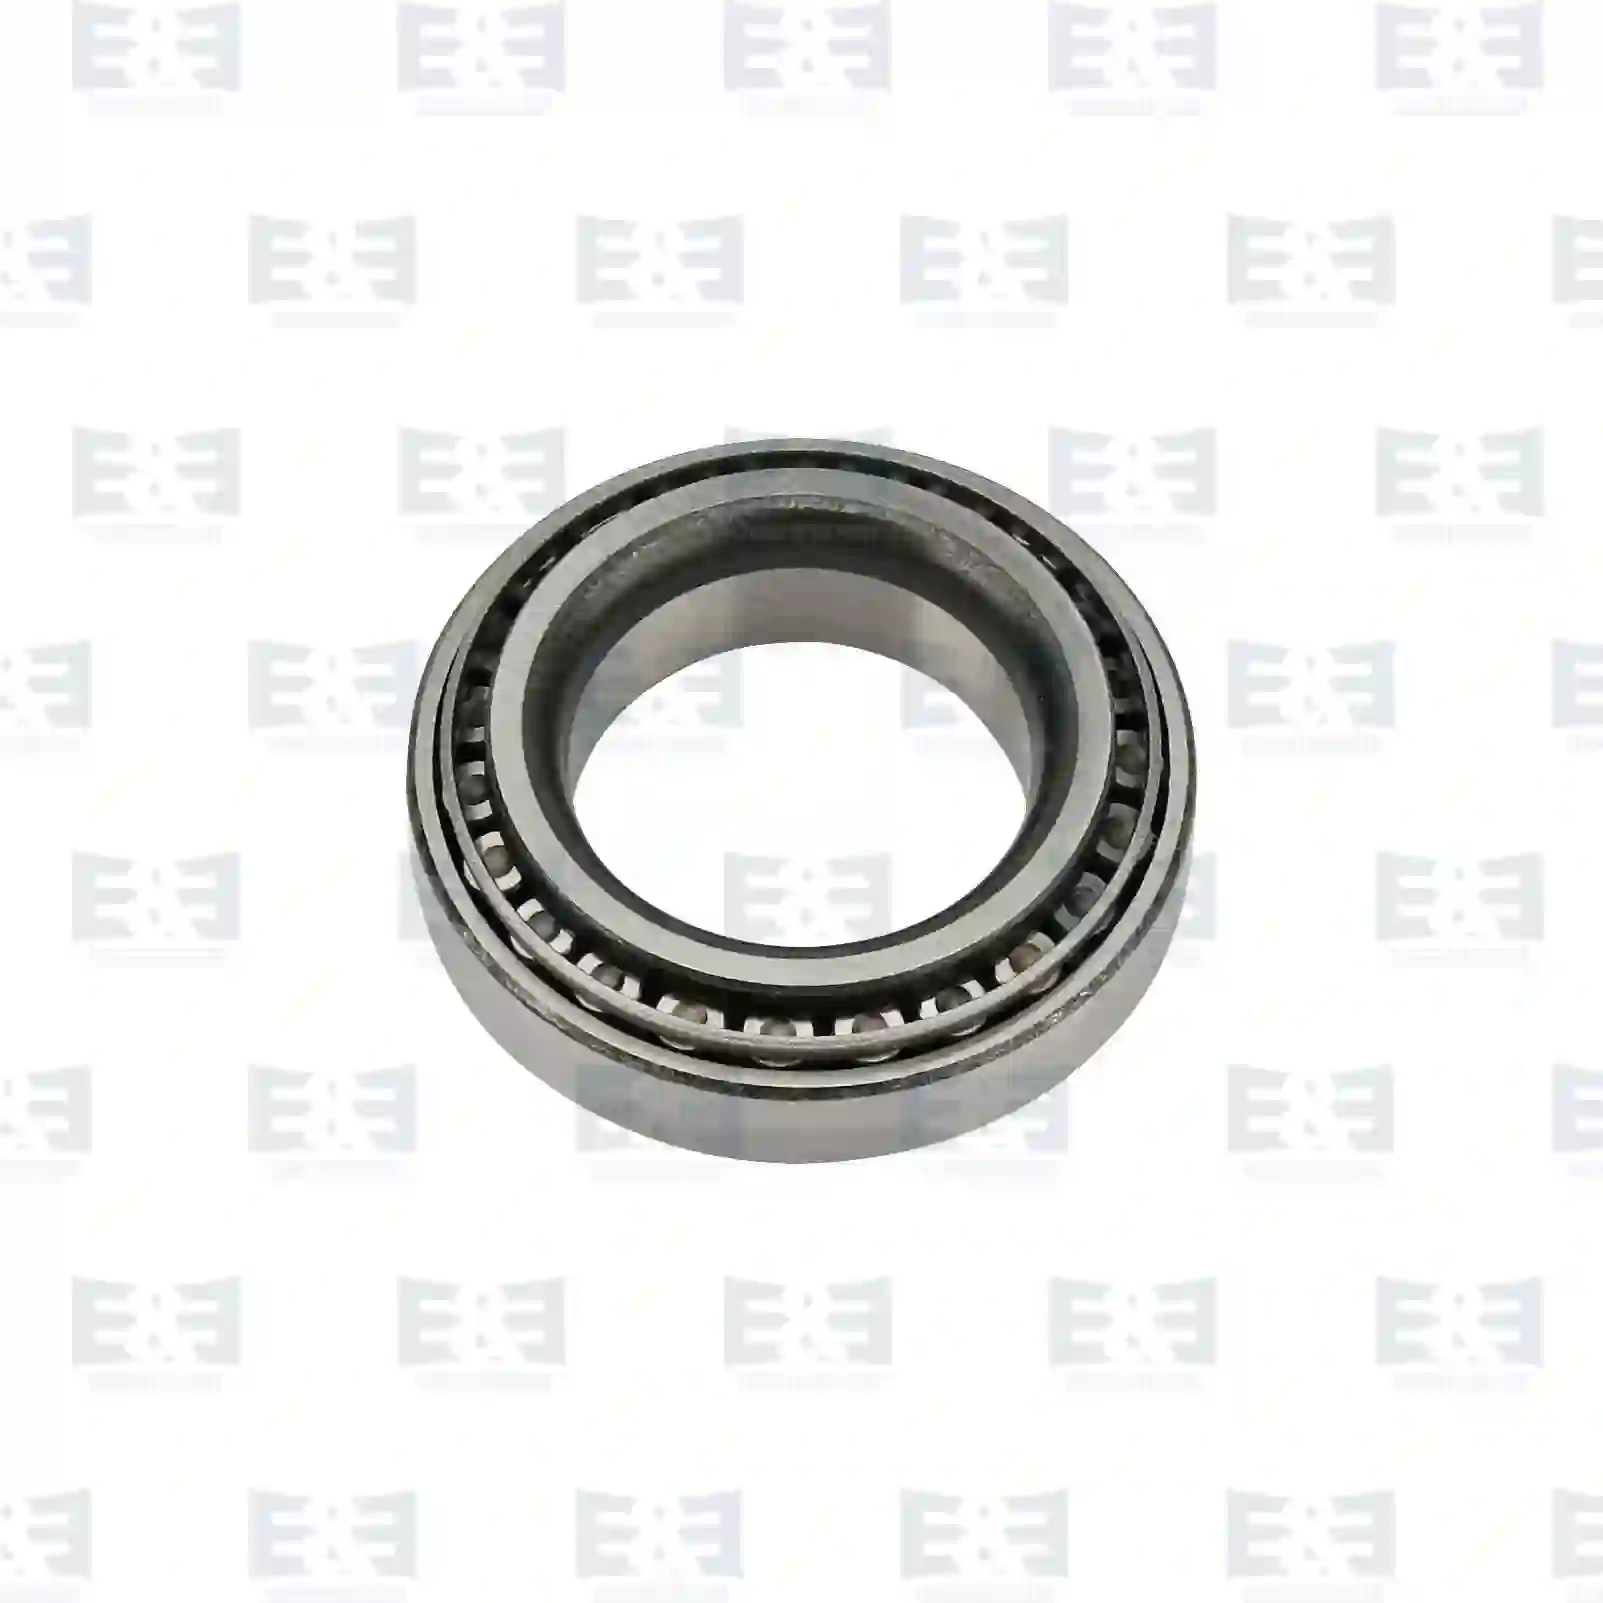 Timing Case Tapered roller bearing, EE No 2E2200297 ,  oem no:2310666, 2350443, 3683975, 3838045, 5097737AA, 5252823, 1513180, 9966510, CAC4999, 0F001-27350, 0K001-27350, F00127305, 0029801902, 99905906100, 893465, 308036, 90368-34083, 1835768, 1835776, 183578 E&E Truck Spare Parts | Truck Spare Parts, Auotomotive Spare Parts